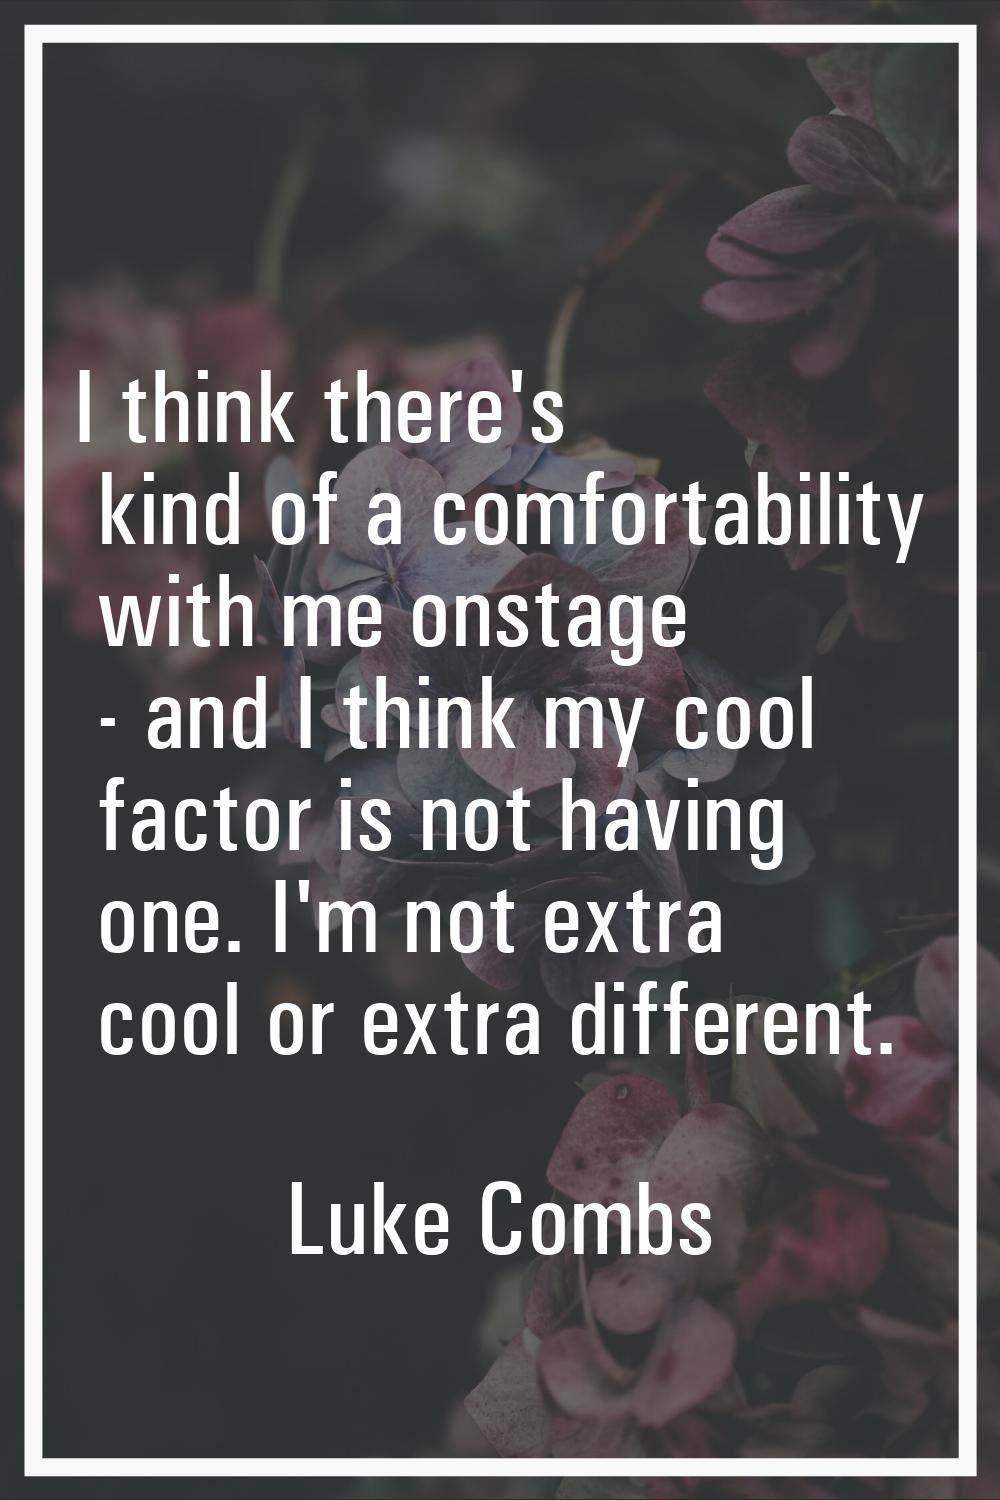 I think there's kind of a comfortability with me onstage - and I think my cool factor is not having